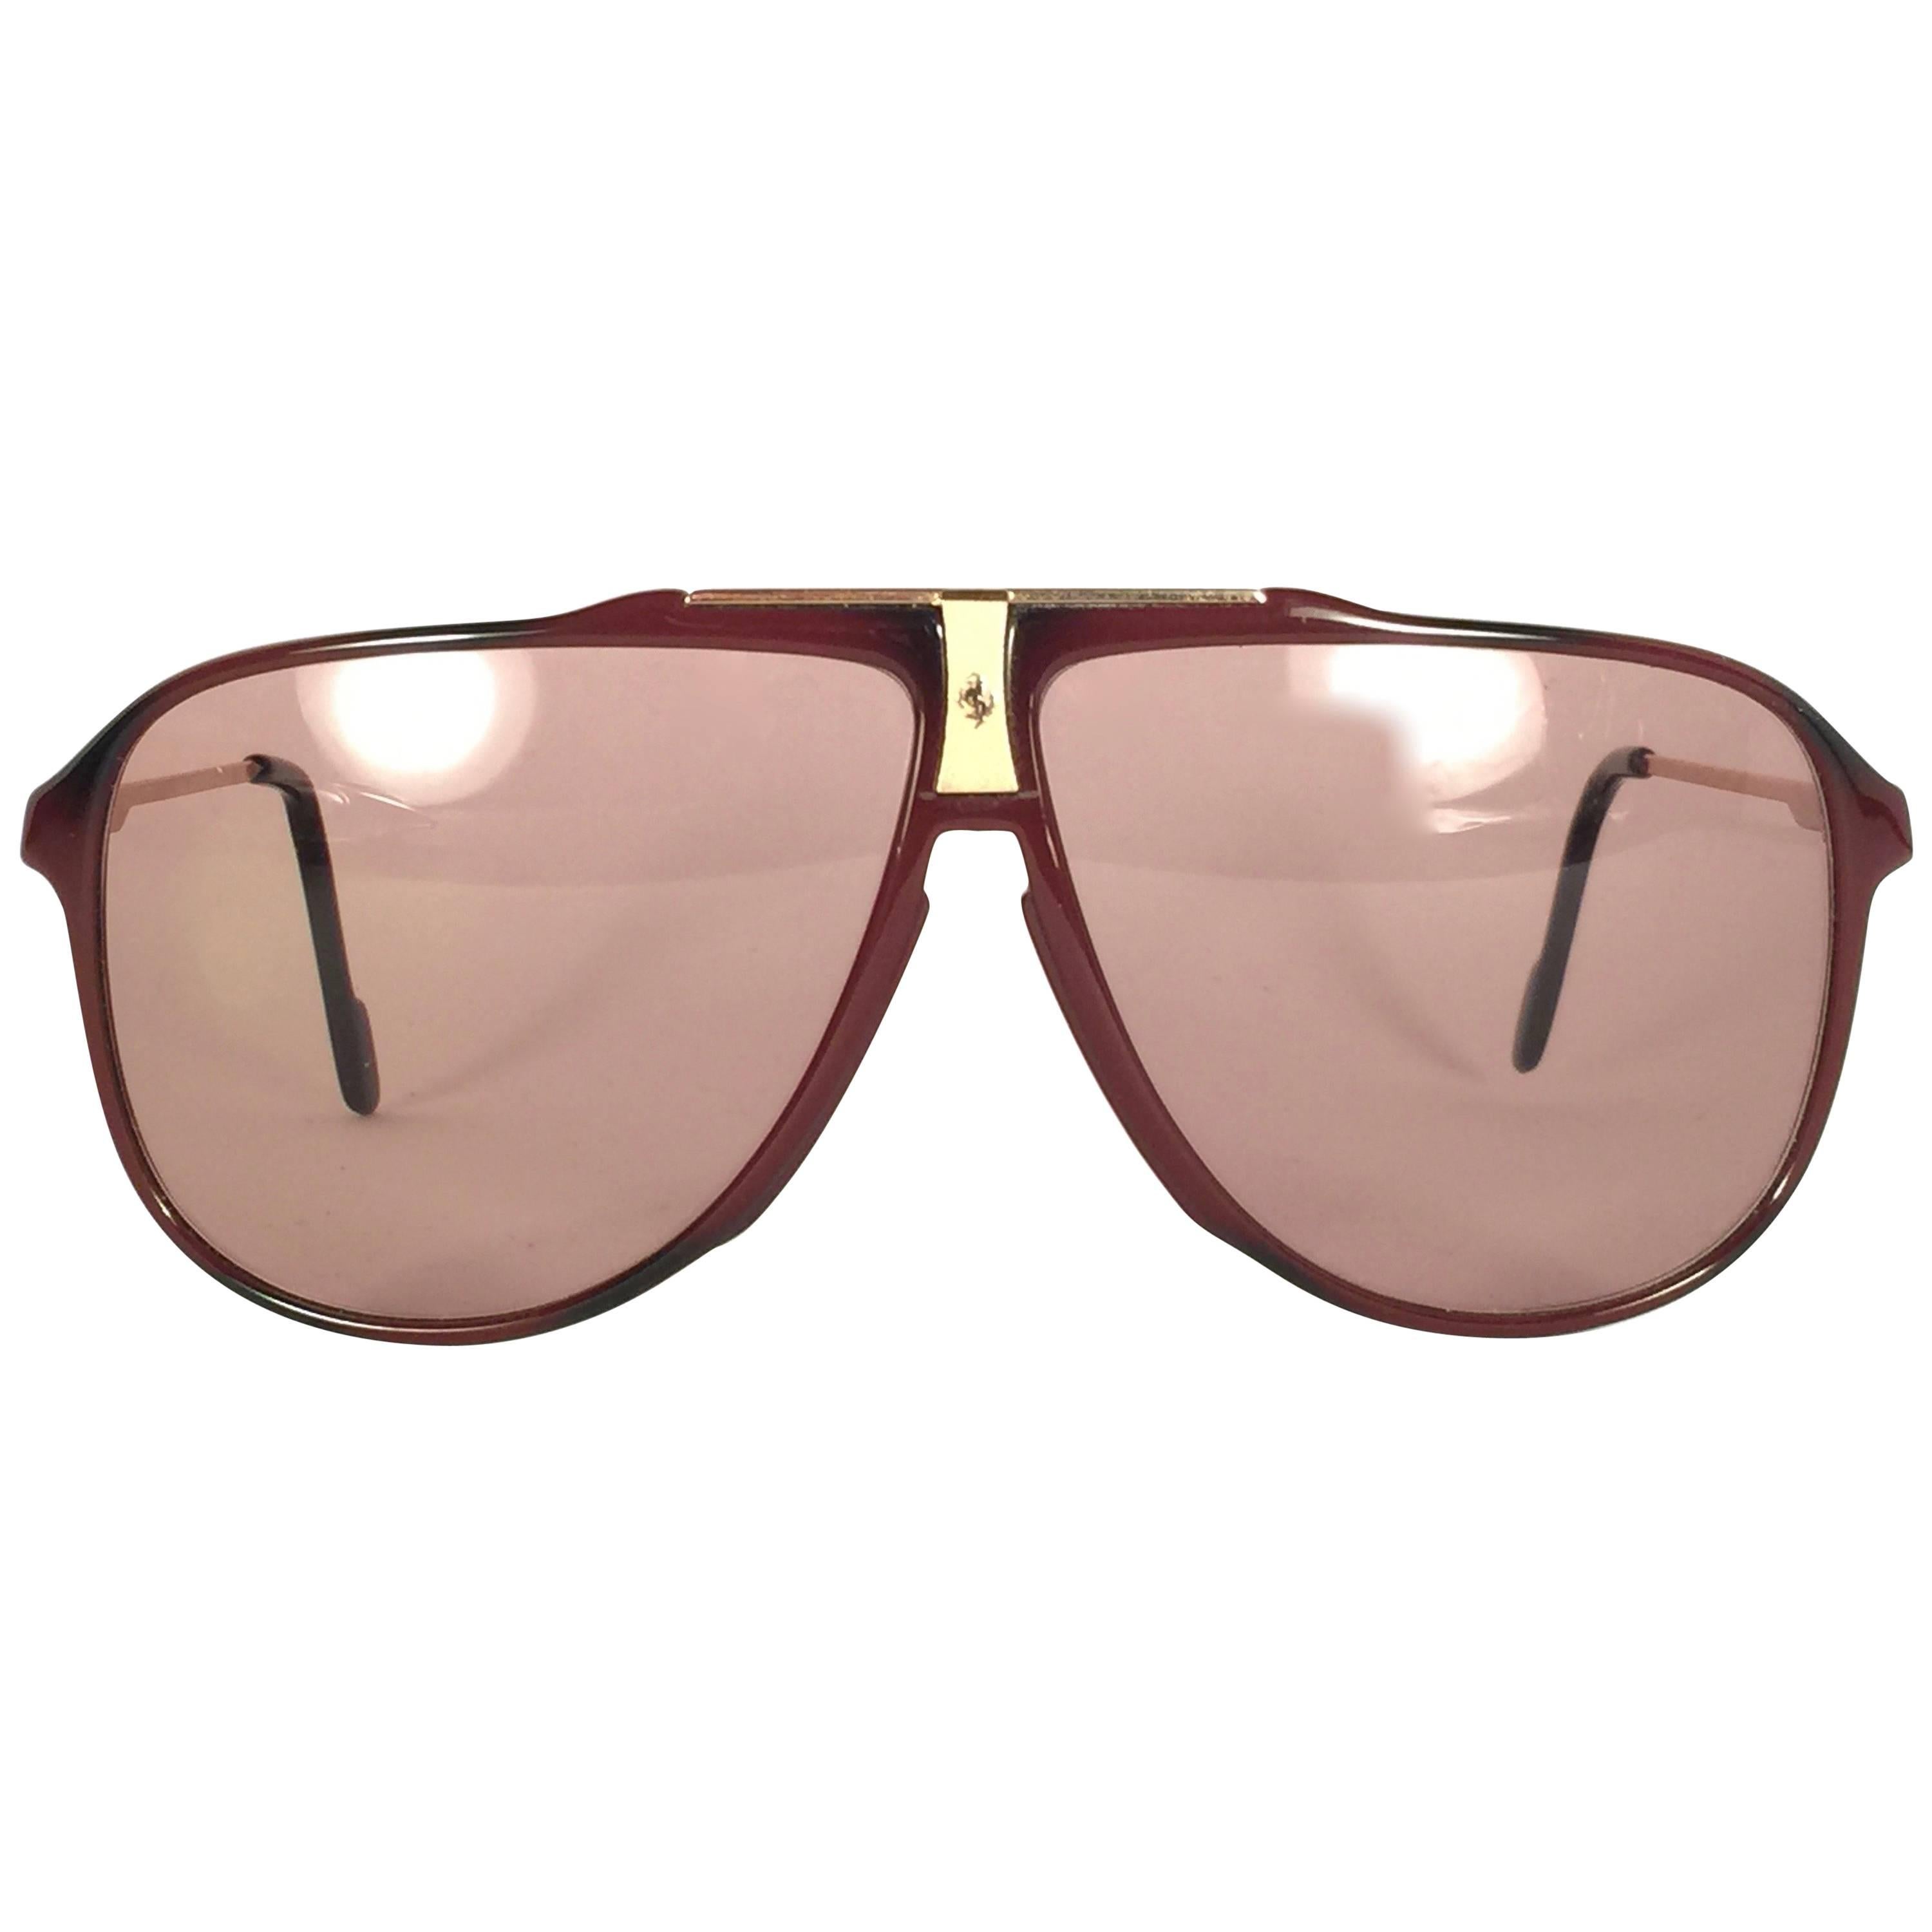 Mint Vintage Ferrari Bordeaux & Gold Accents 1980 Made in Italy Sunglasses